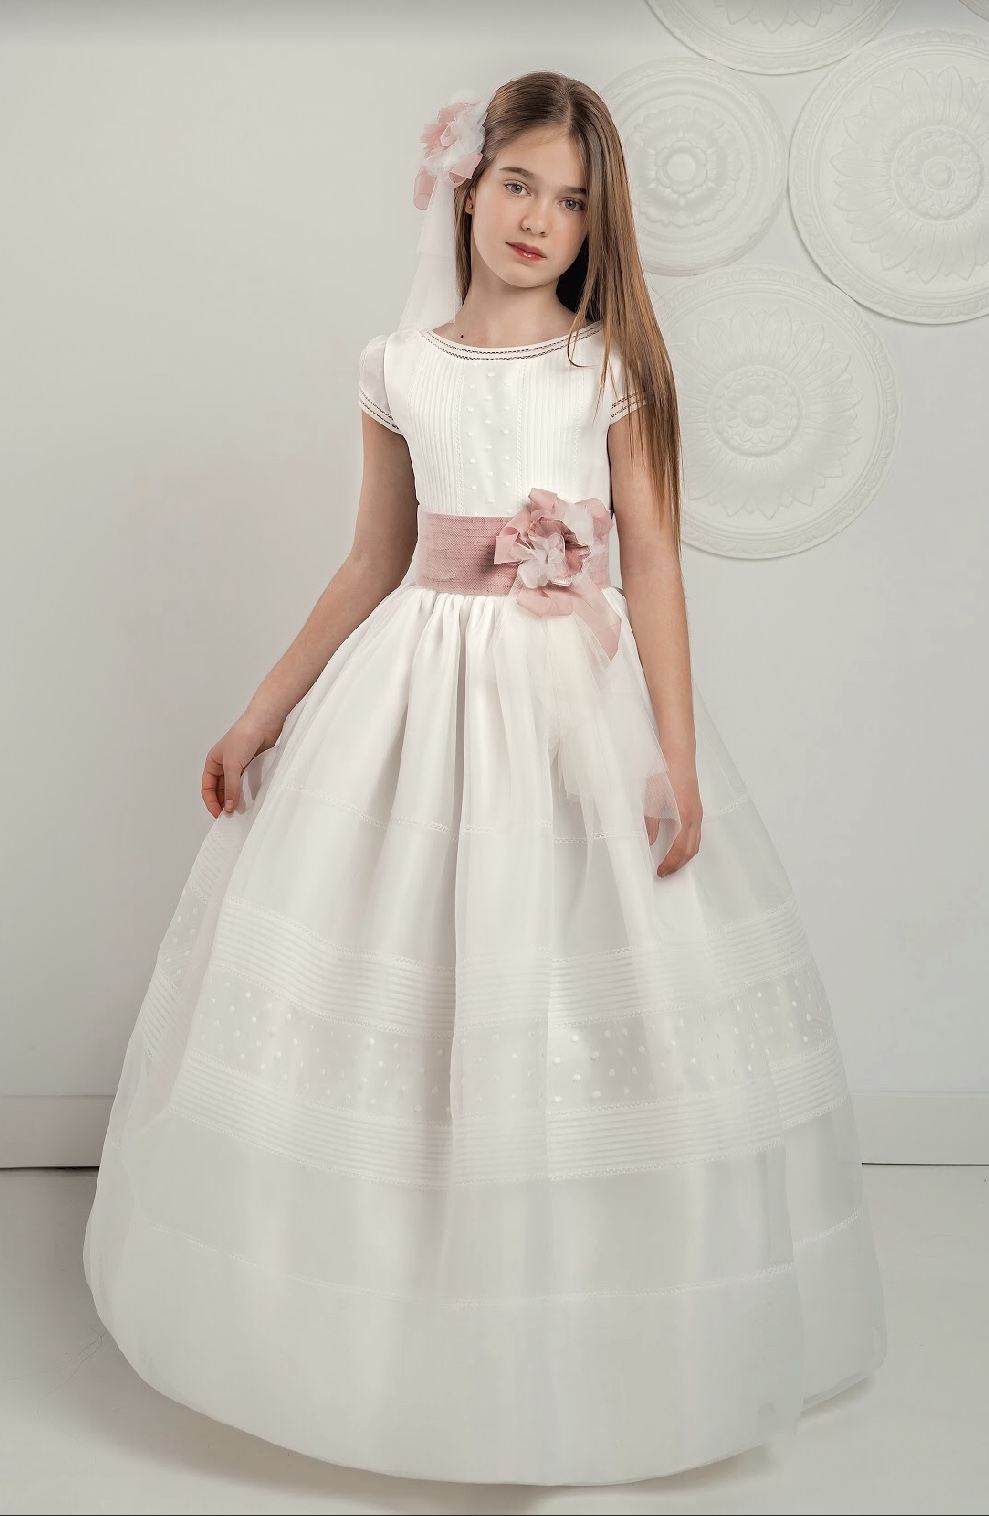 White Organza Communion Dress with delicate plumetti, tucks and short sleeves